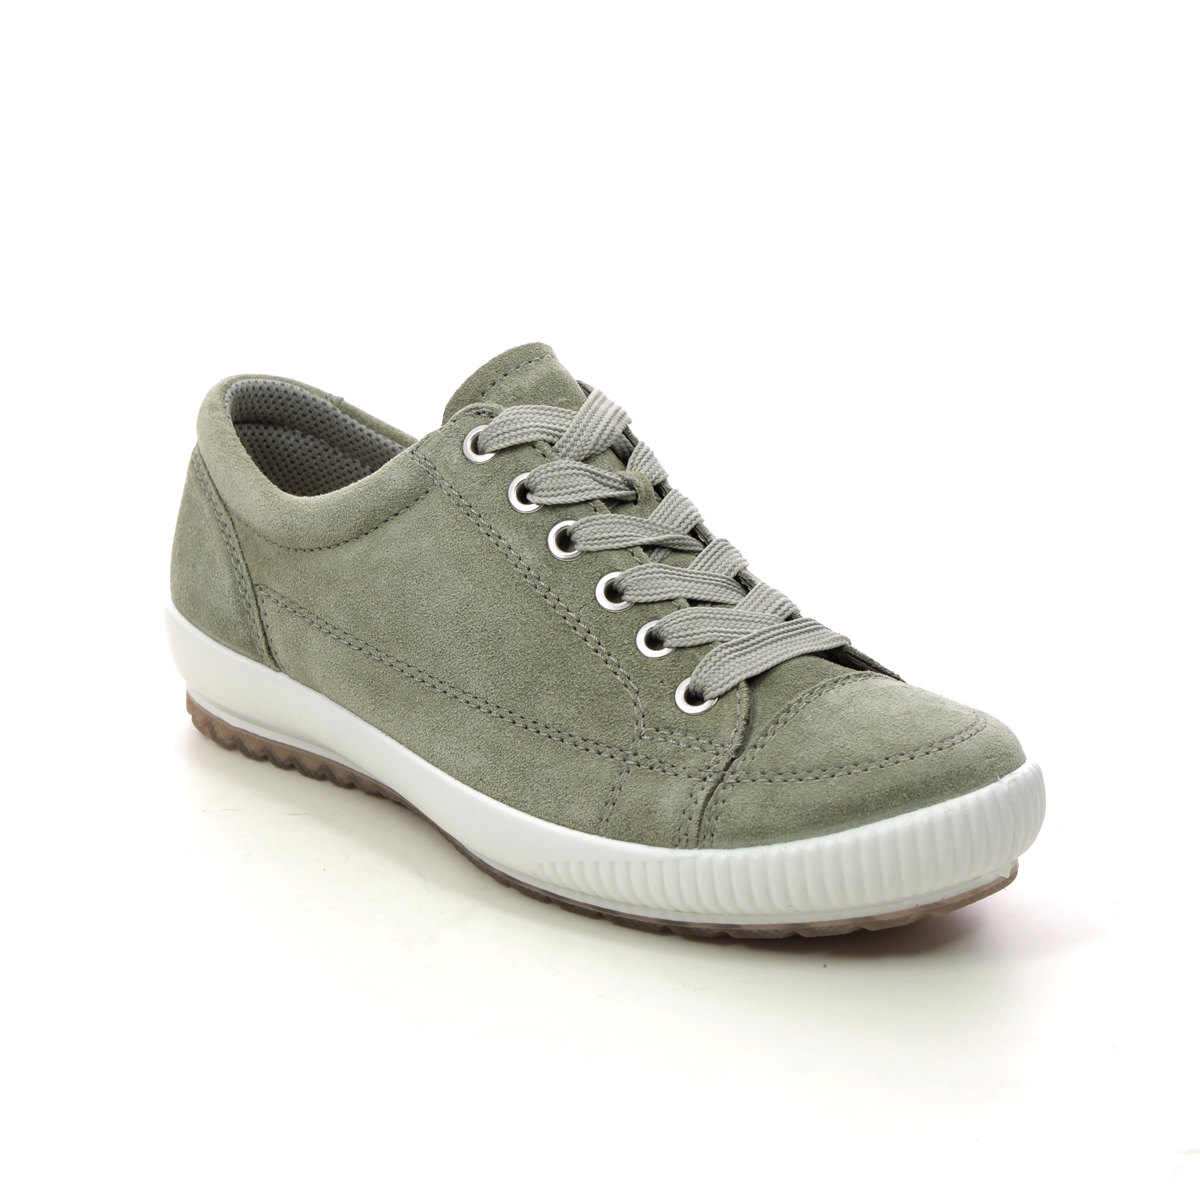 Legero Tanaro Stitch Light Green Womens lacing shoes 2000820-7520 in a Plain Leather in Size 5.5